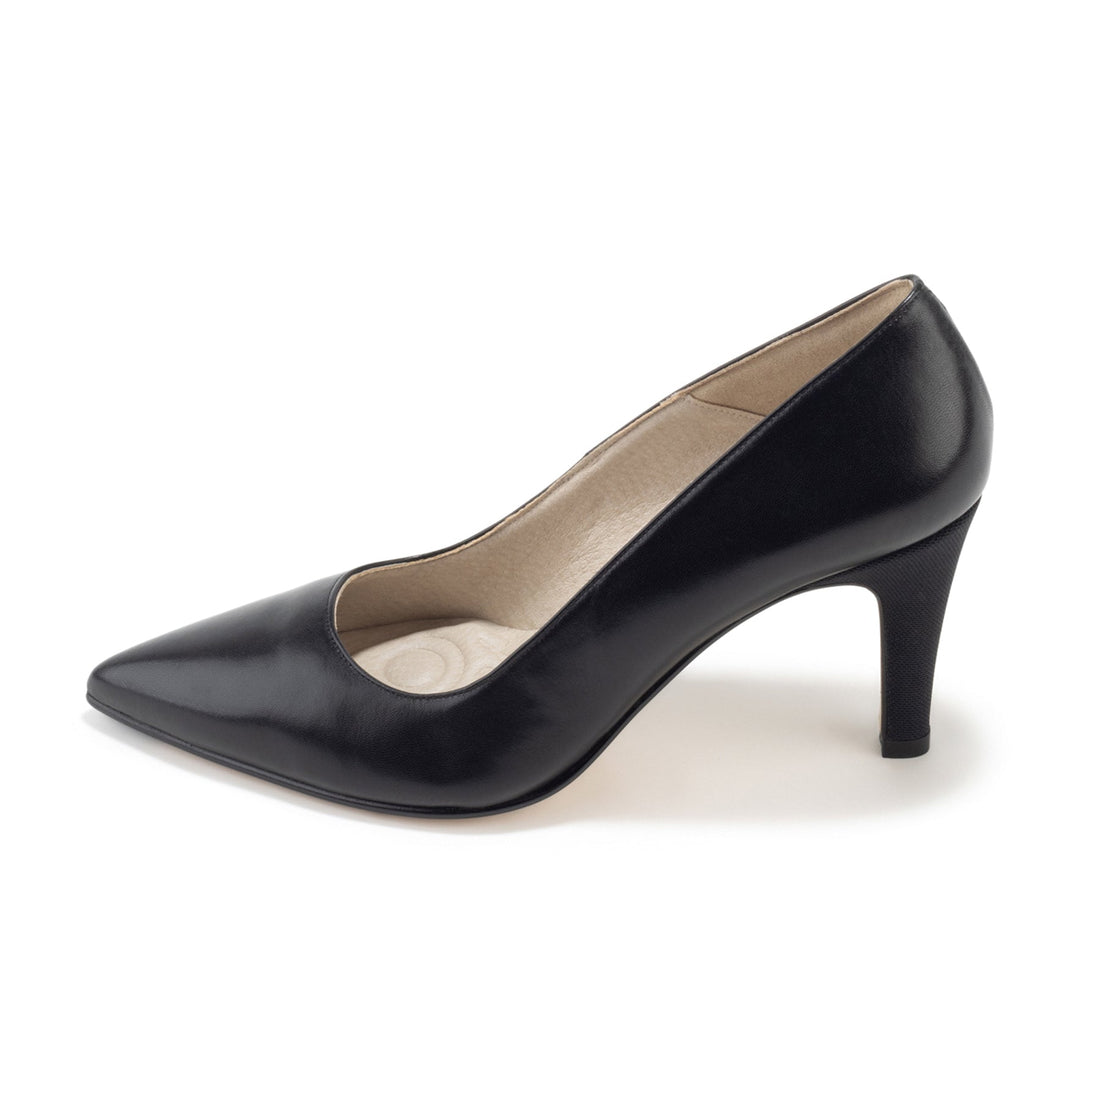 Comfortable Shoes for Women, High Heels for Women - Antonia Saint NY